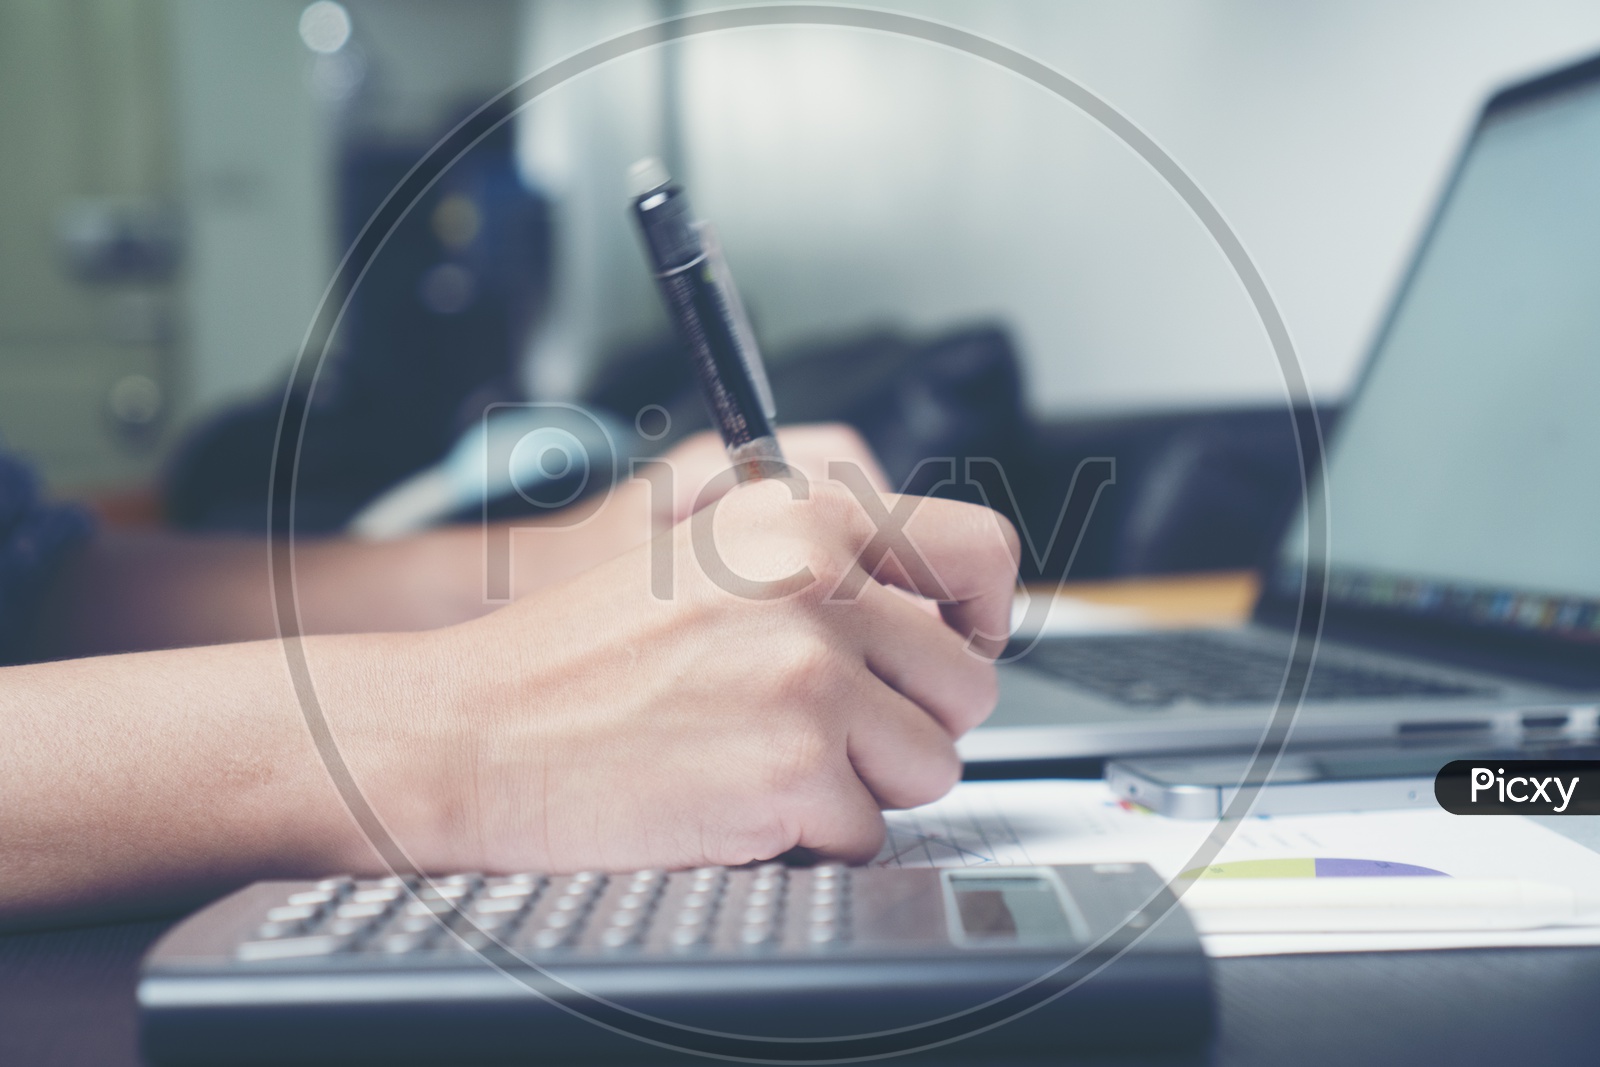 Employee Or Businessman Working On Laptop With Paperwork Of Business Analysis Charts At Office Desk With Hands Closeup